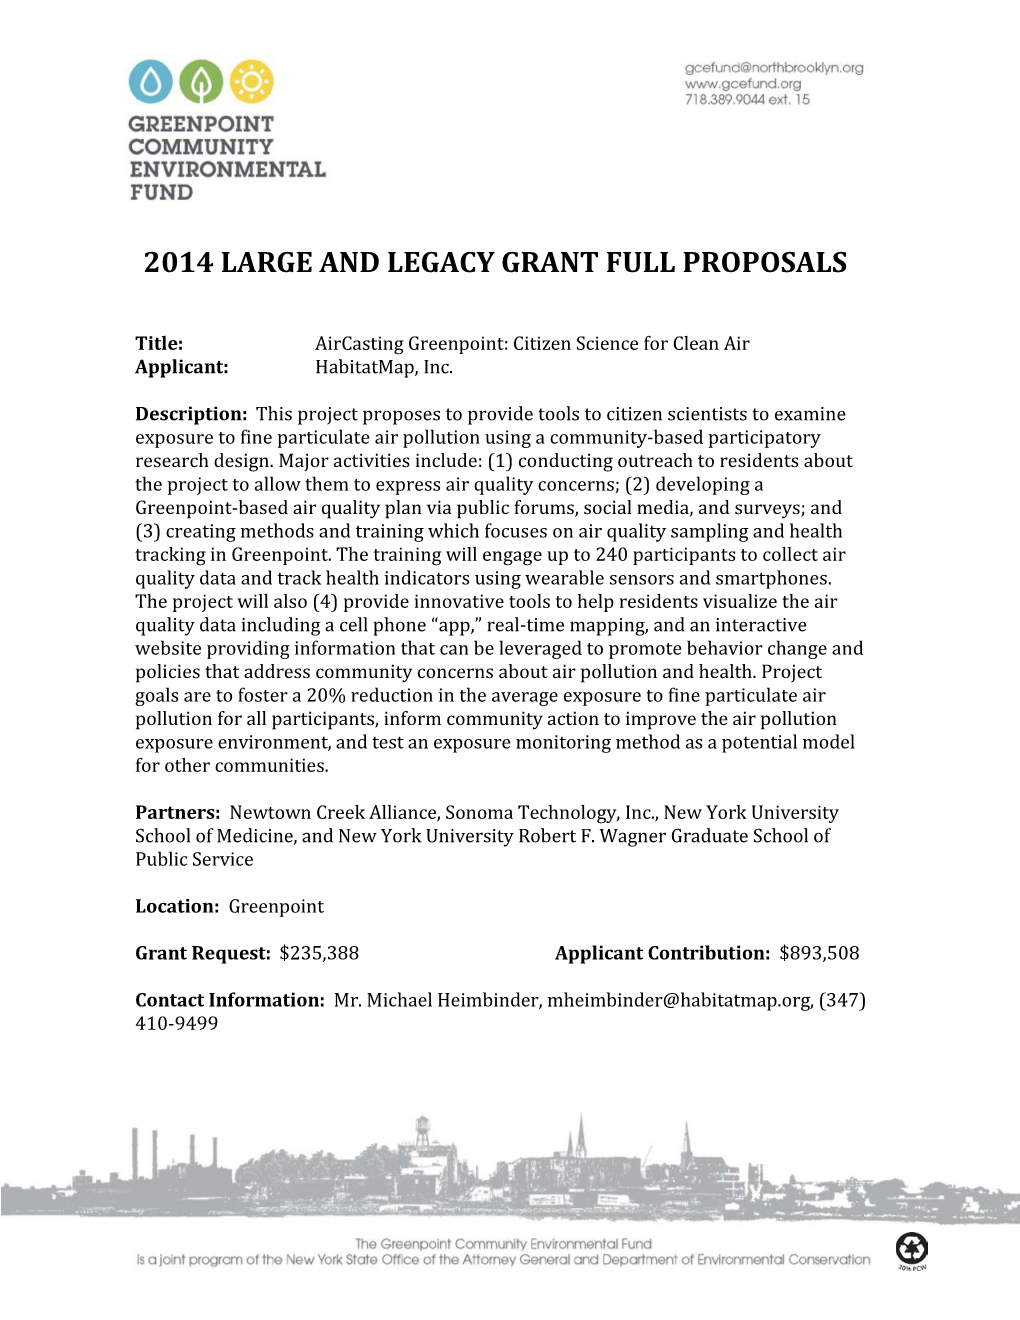 2014 Large and Legacy Grant Full Proposals